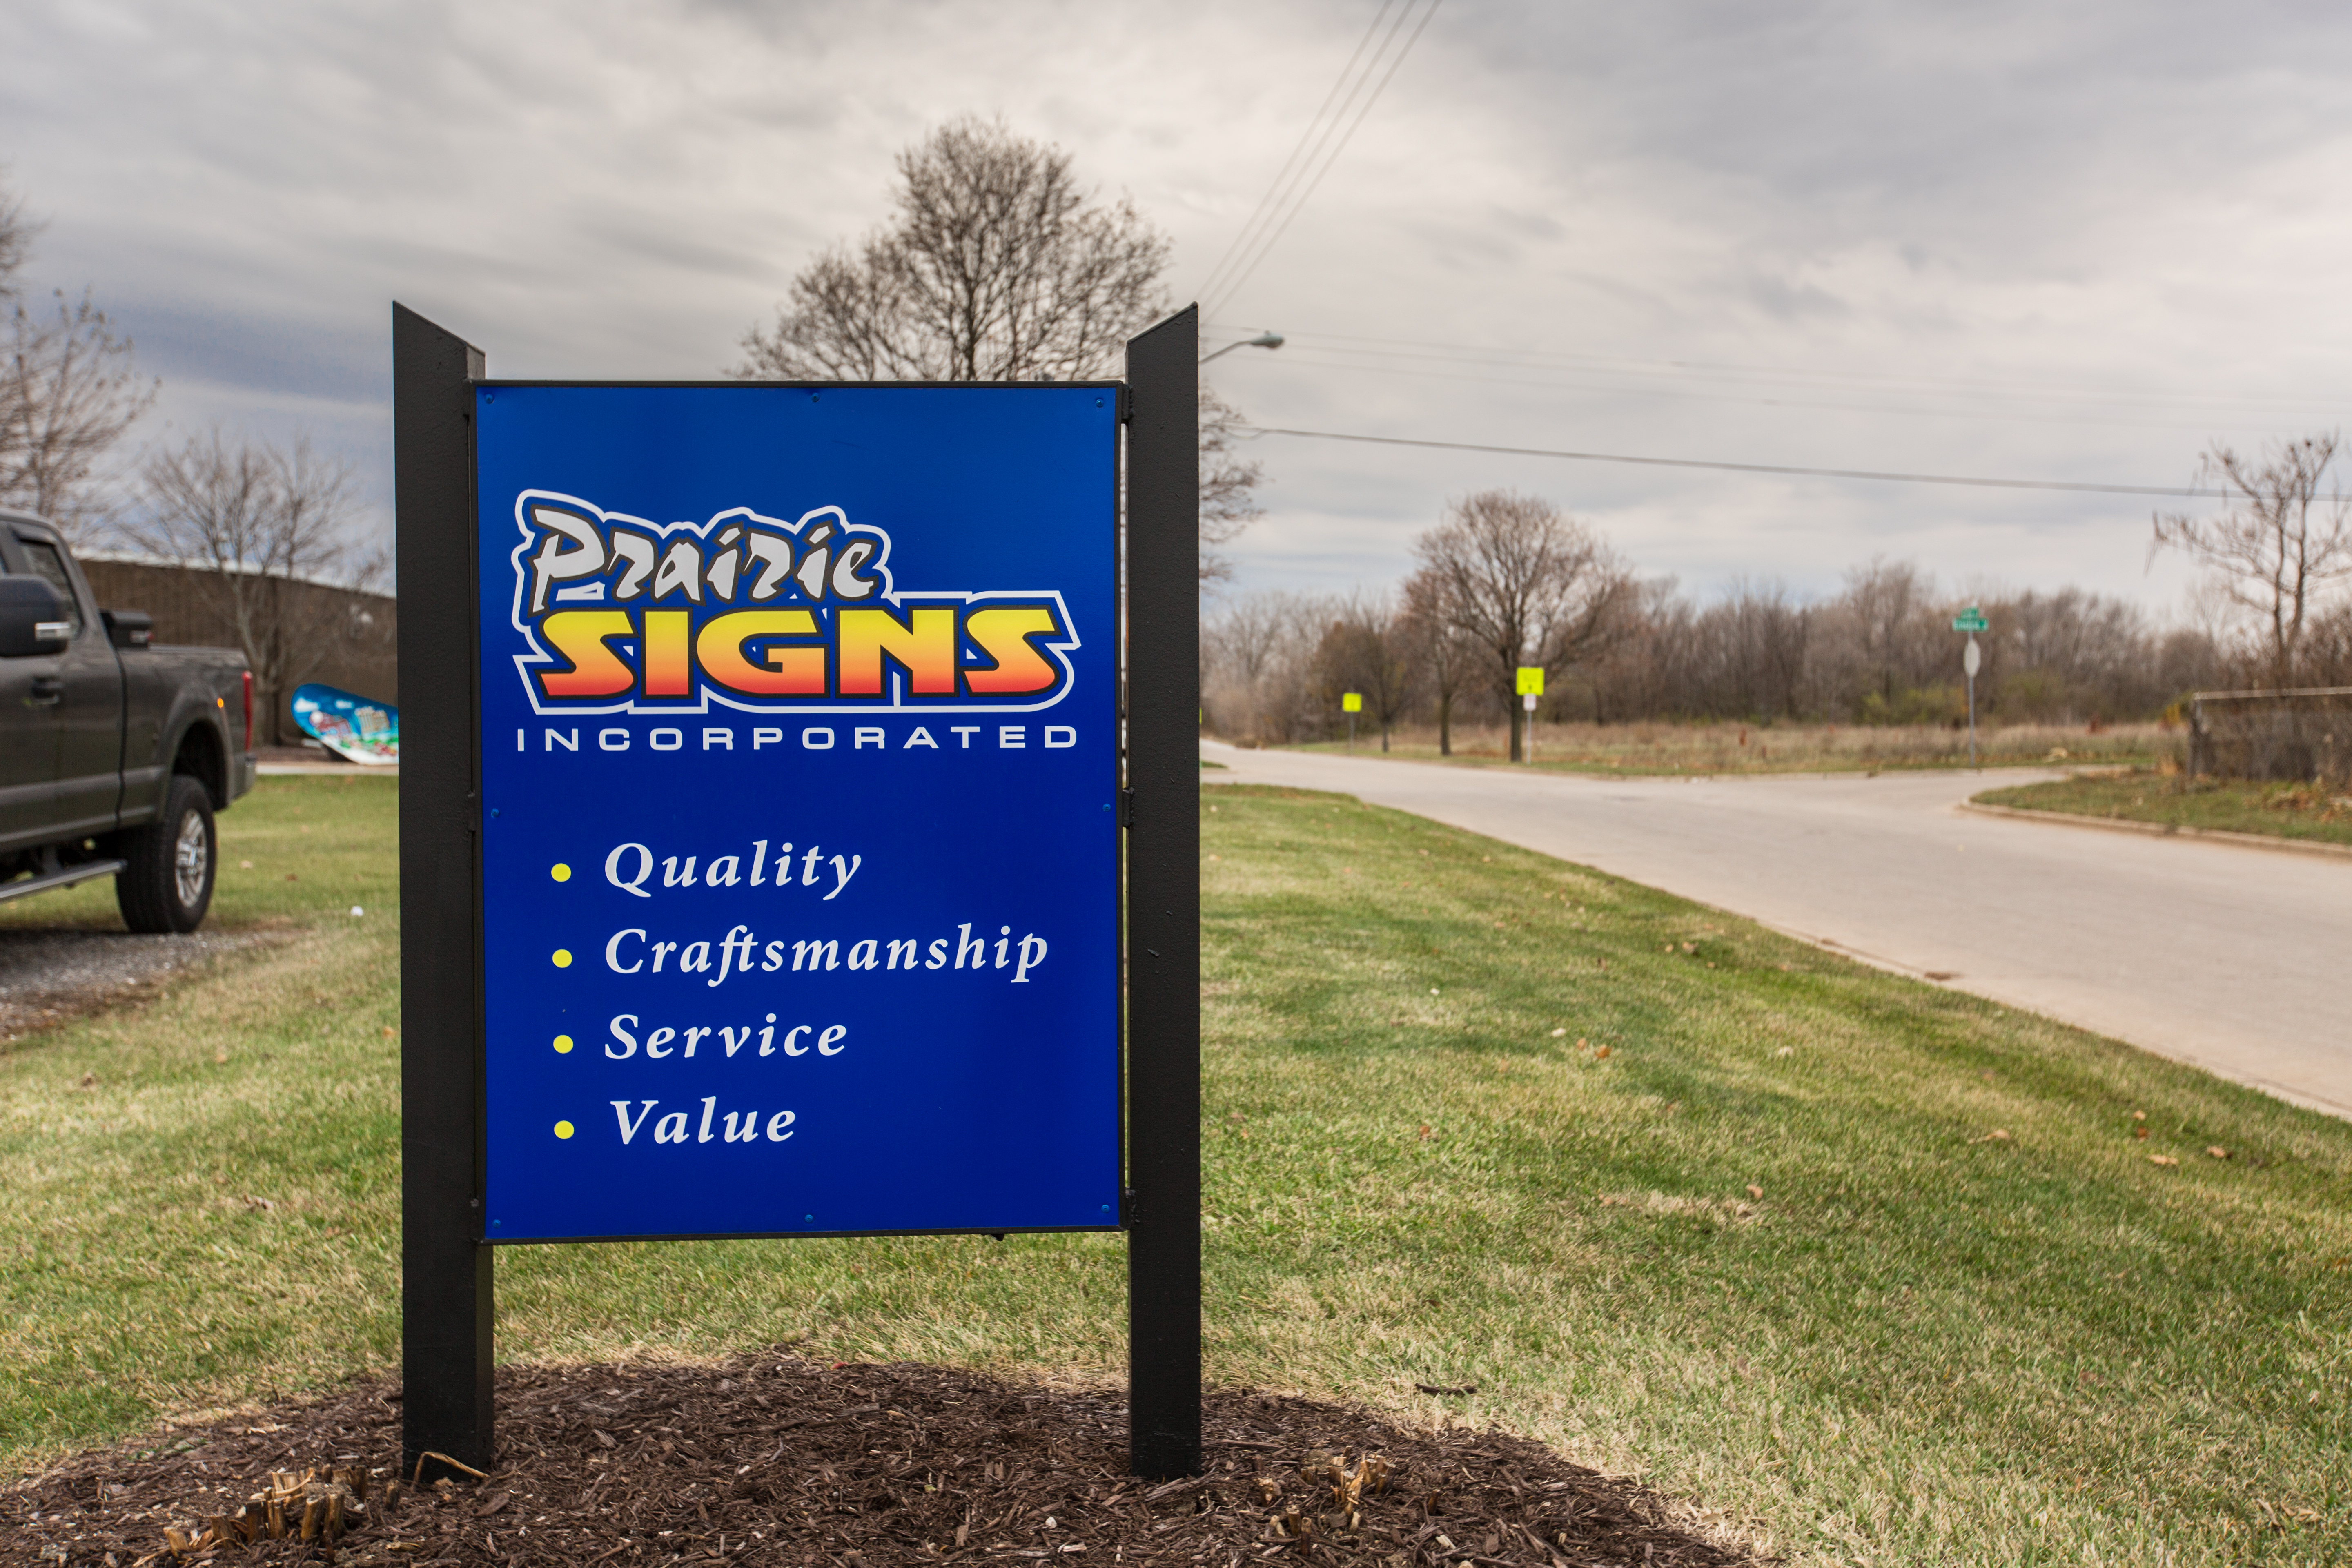 Prairie Signs: Our Values are Quality - Craftsmanship - Service - Value